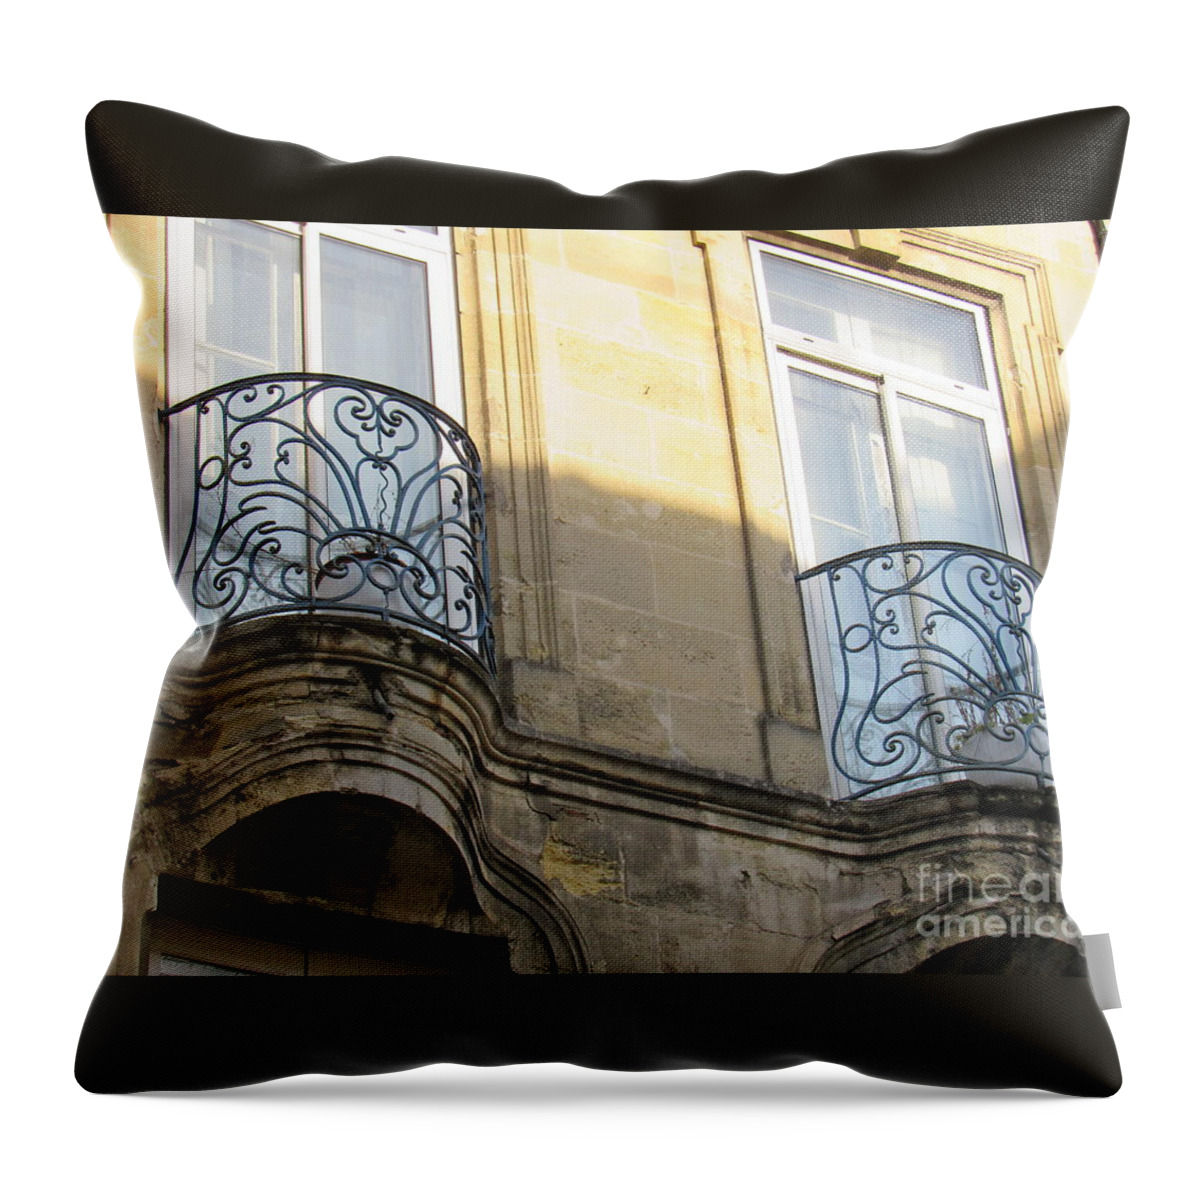 France Throw Pillow featuring the photograph Iconic Ironwork Balconies by Barbara Plattenburg